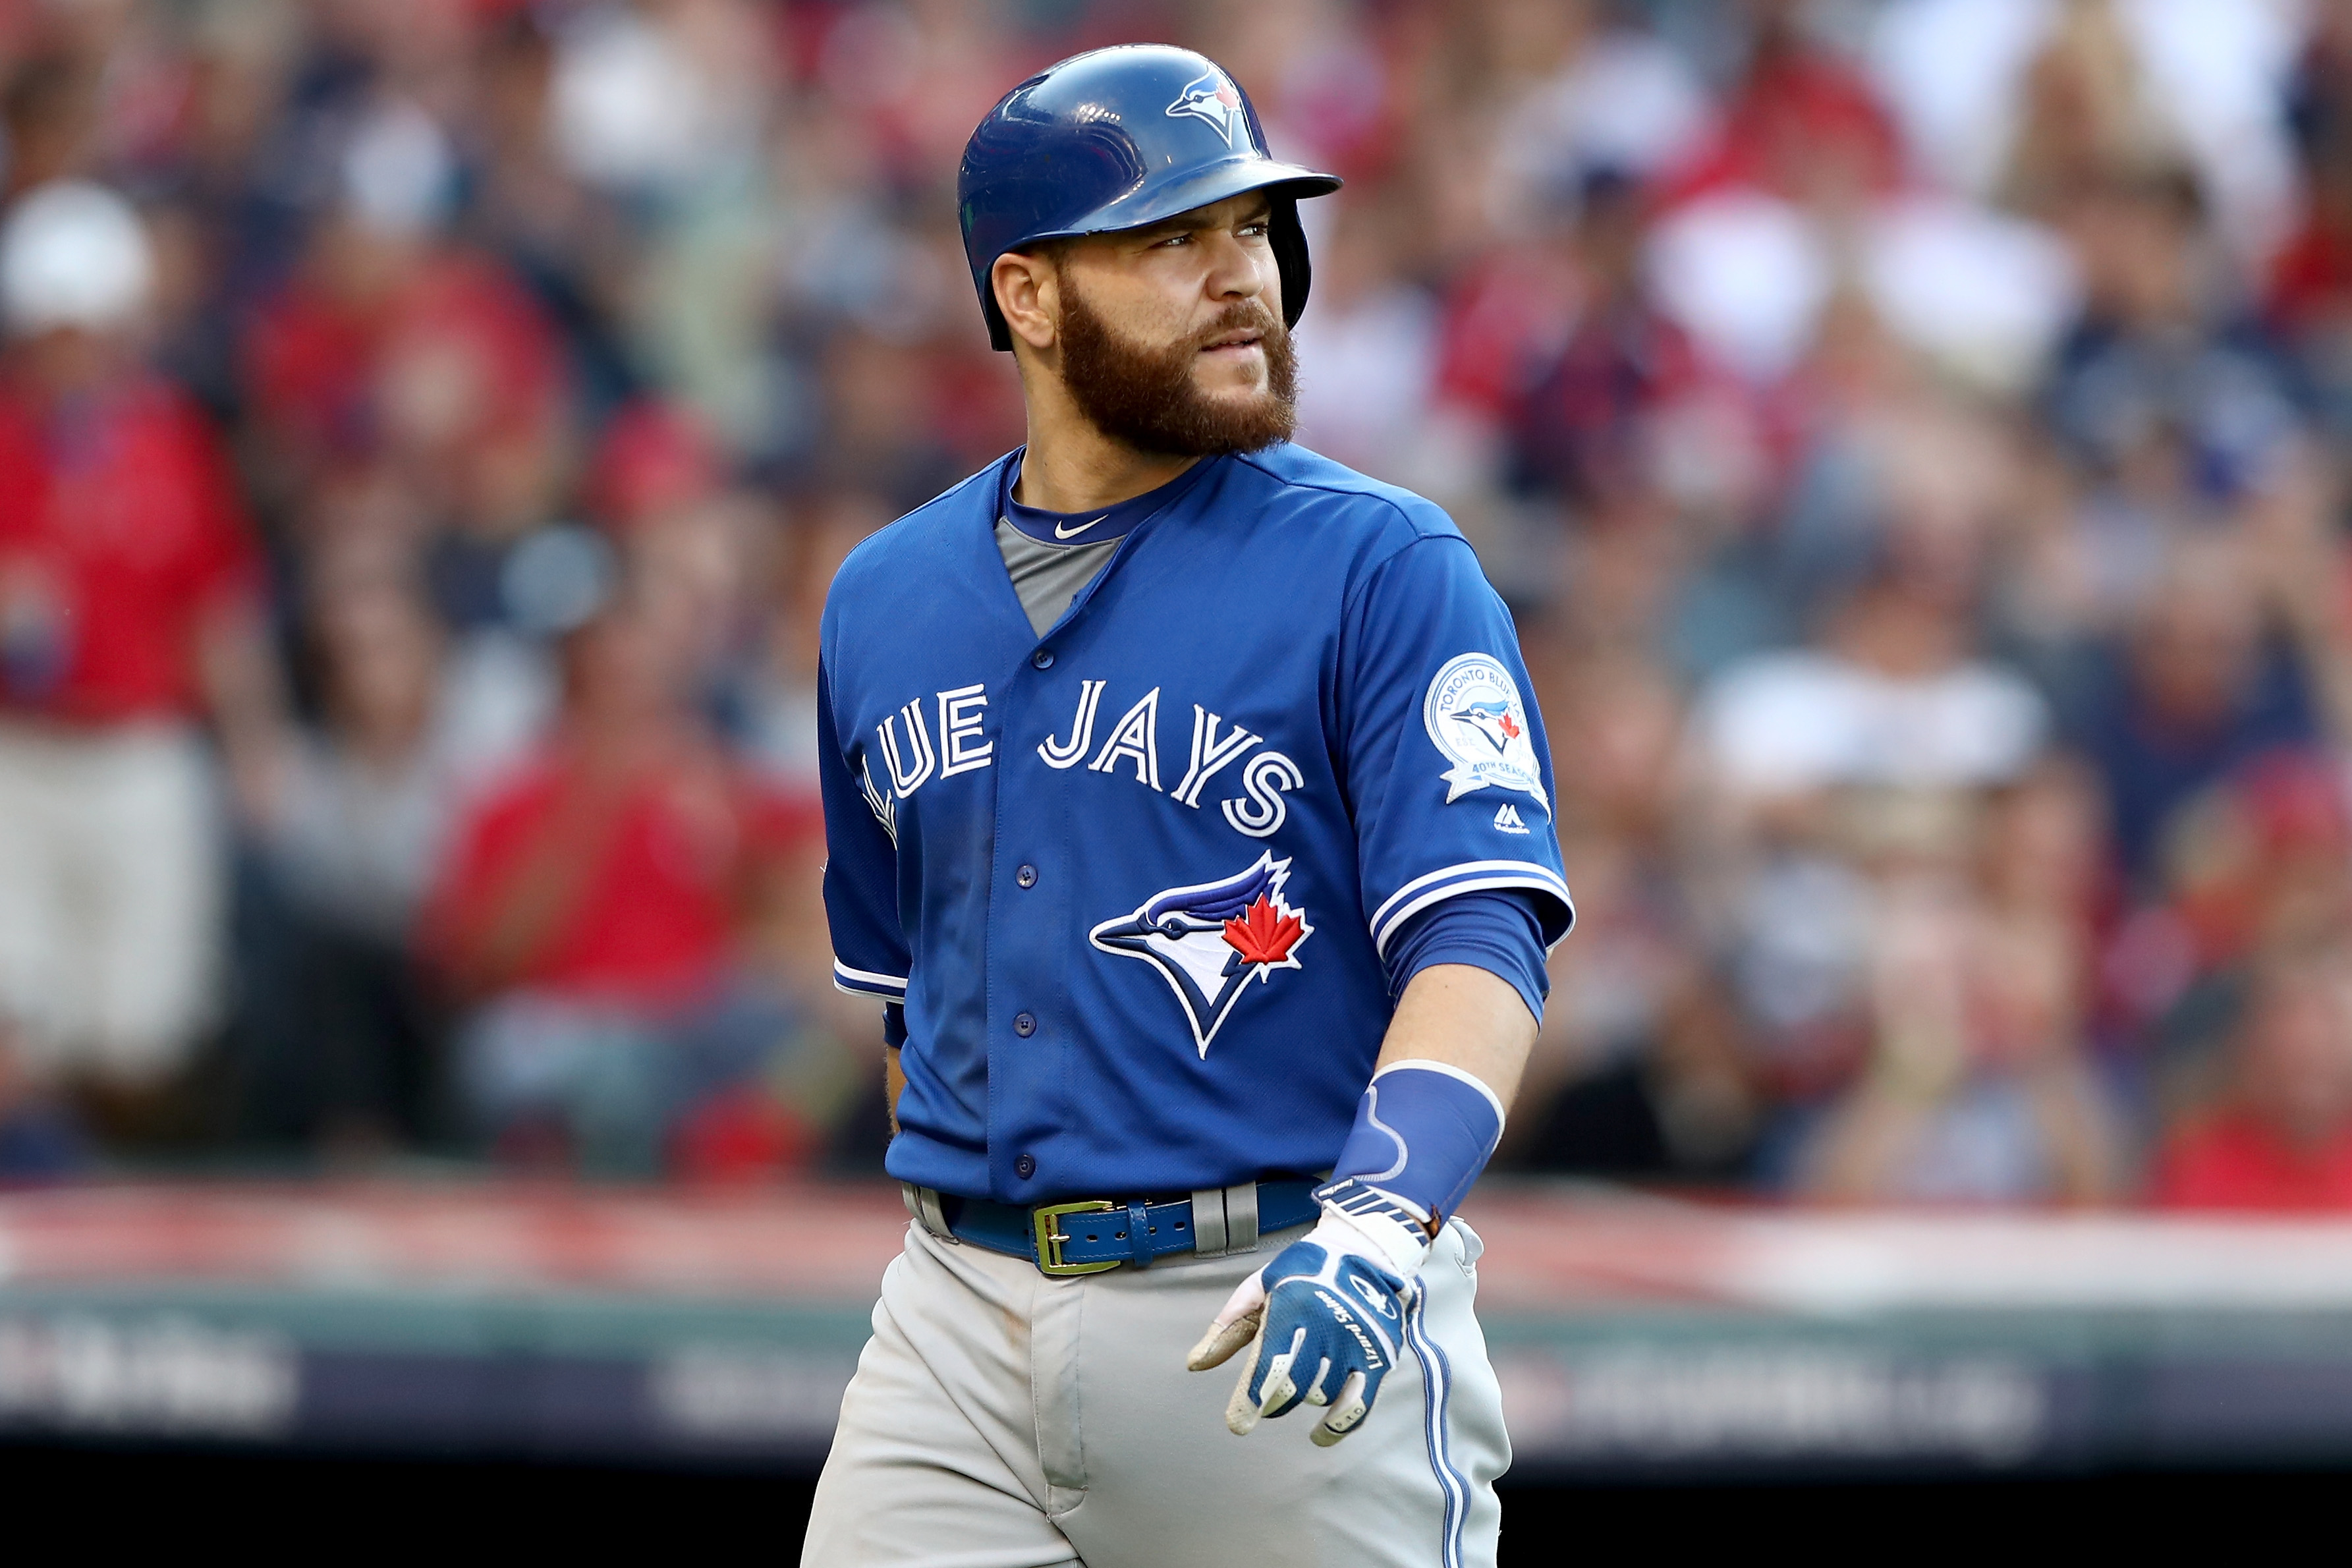 Troy Tulowitzki, Russell Martin Really Need to Have Strong Starts